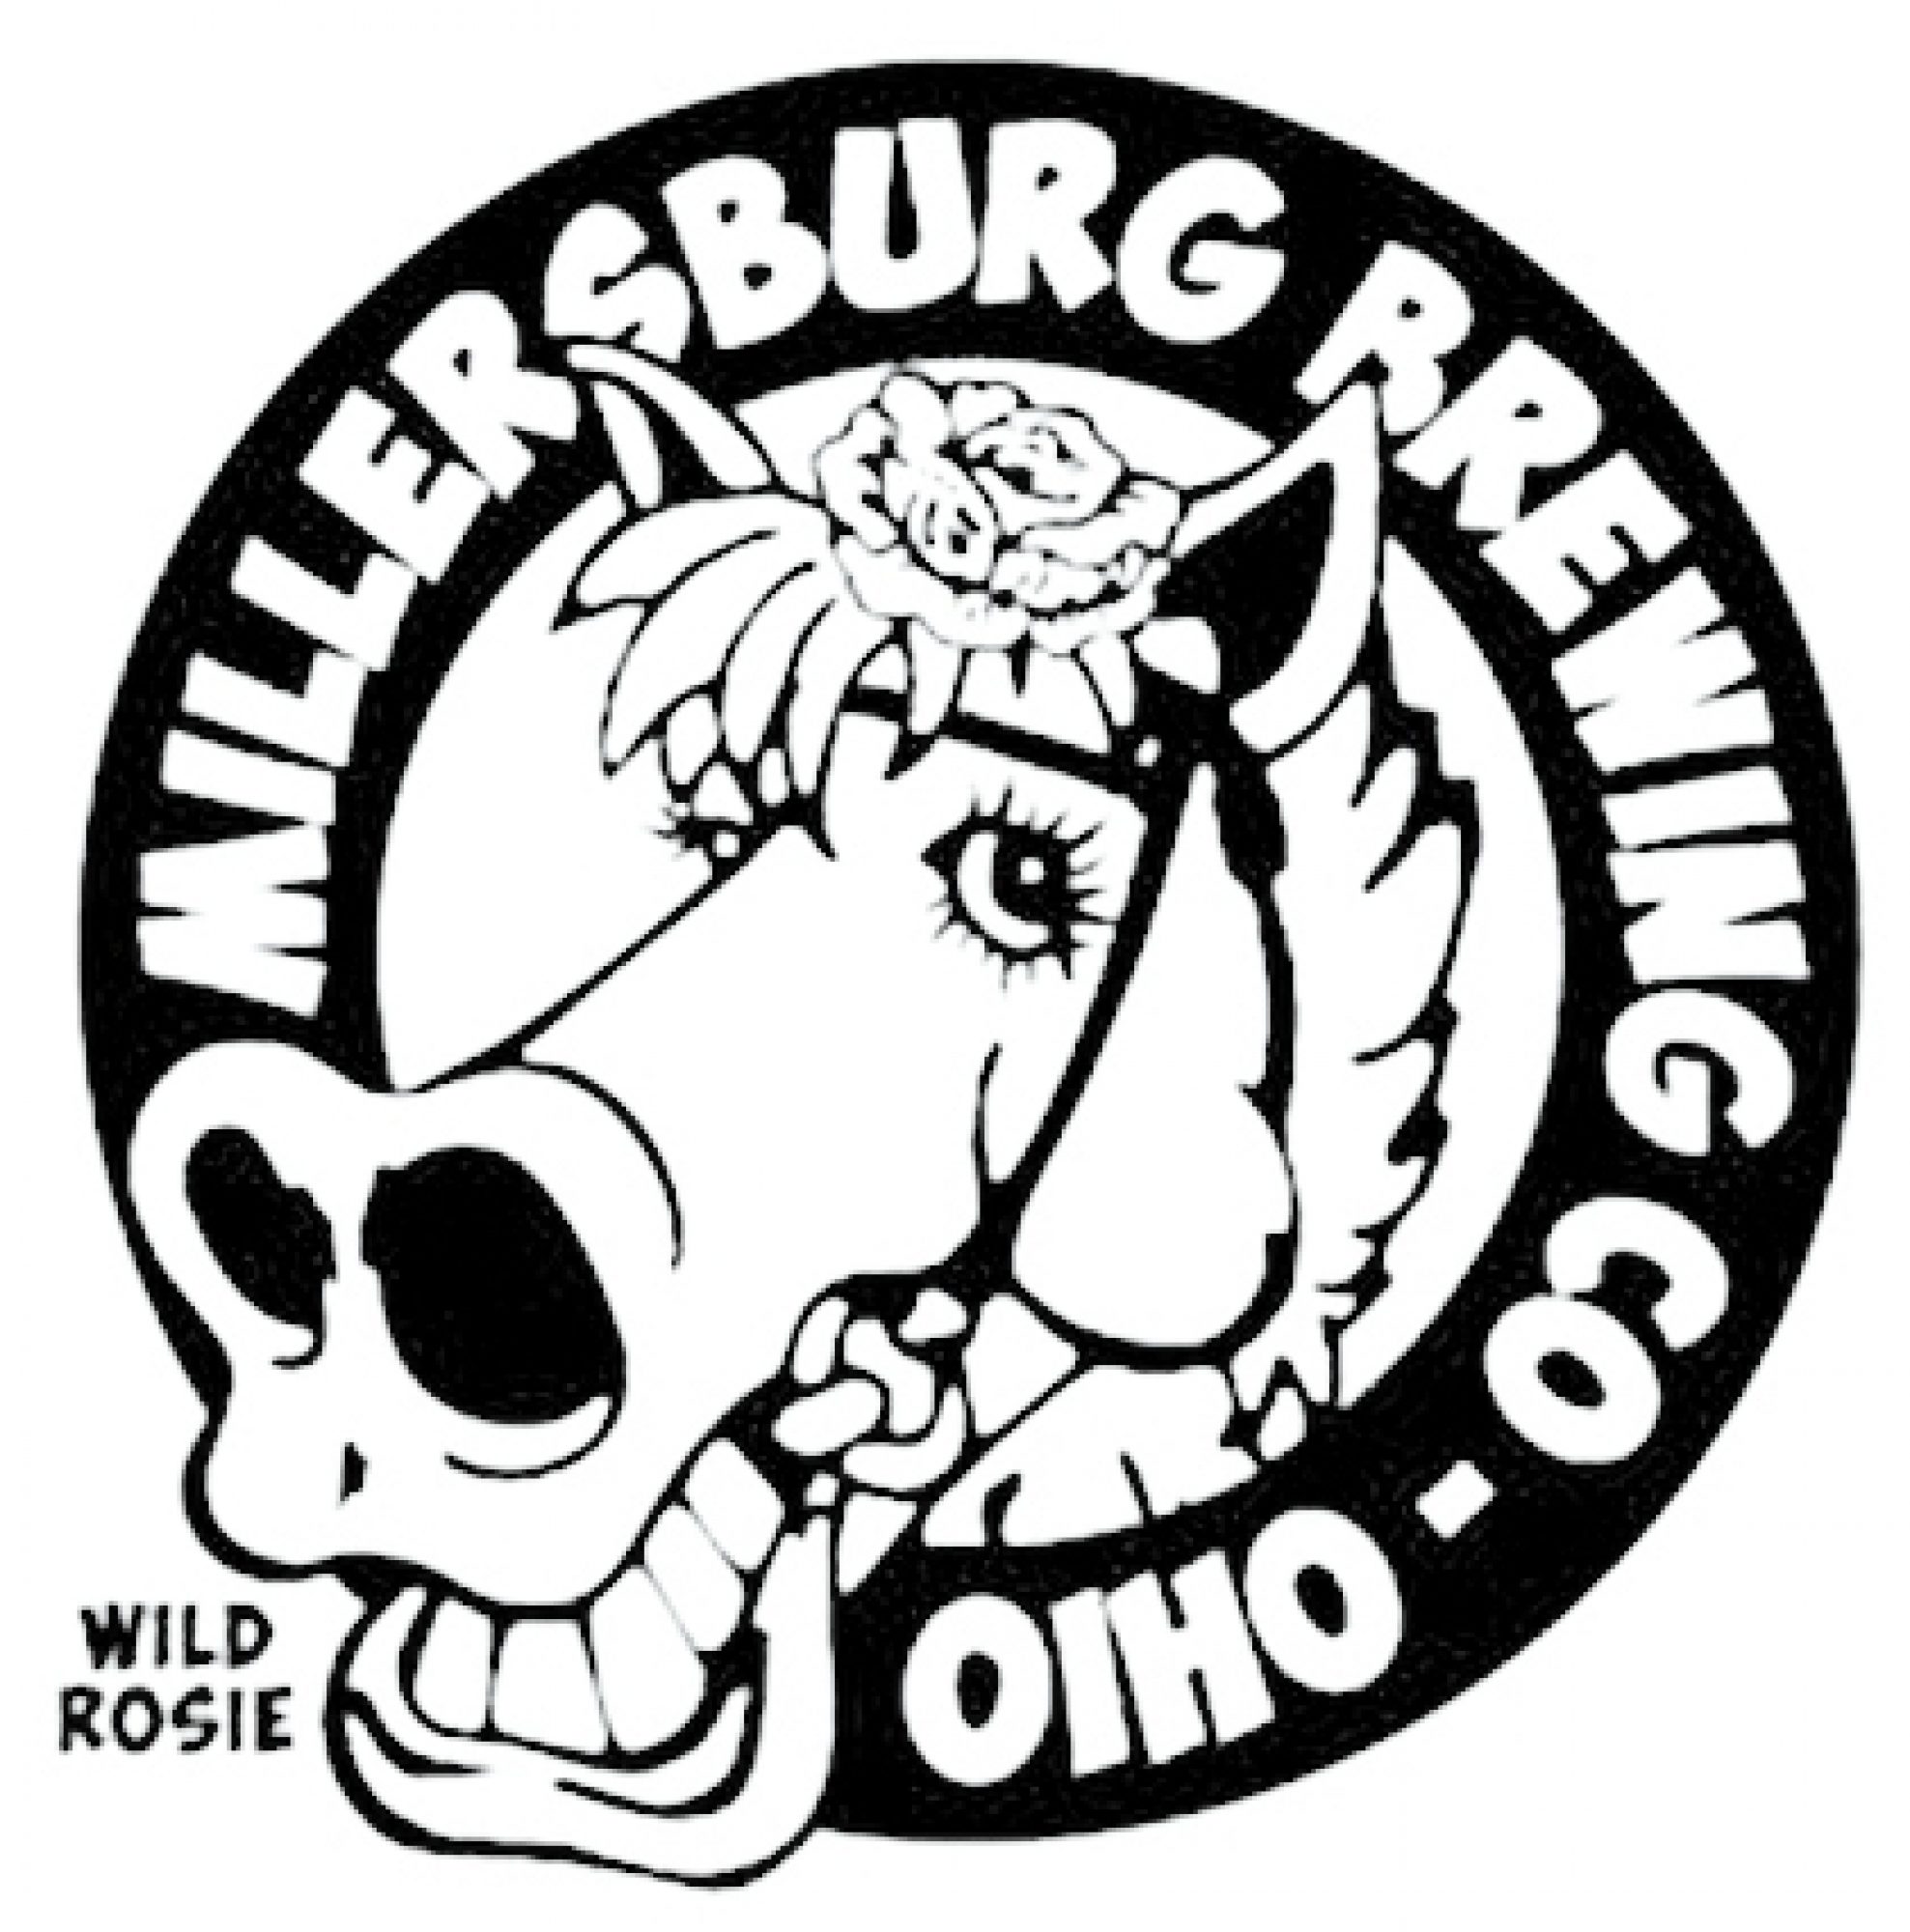 Millersburg Brewing Company | Ohio's Amish Country